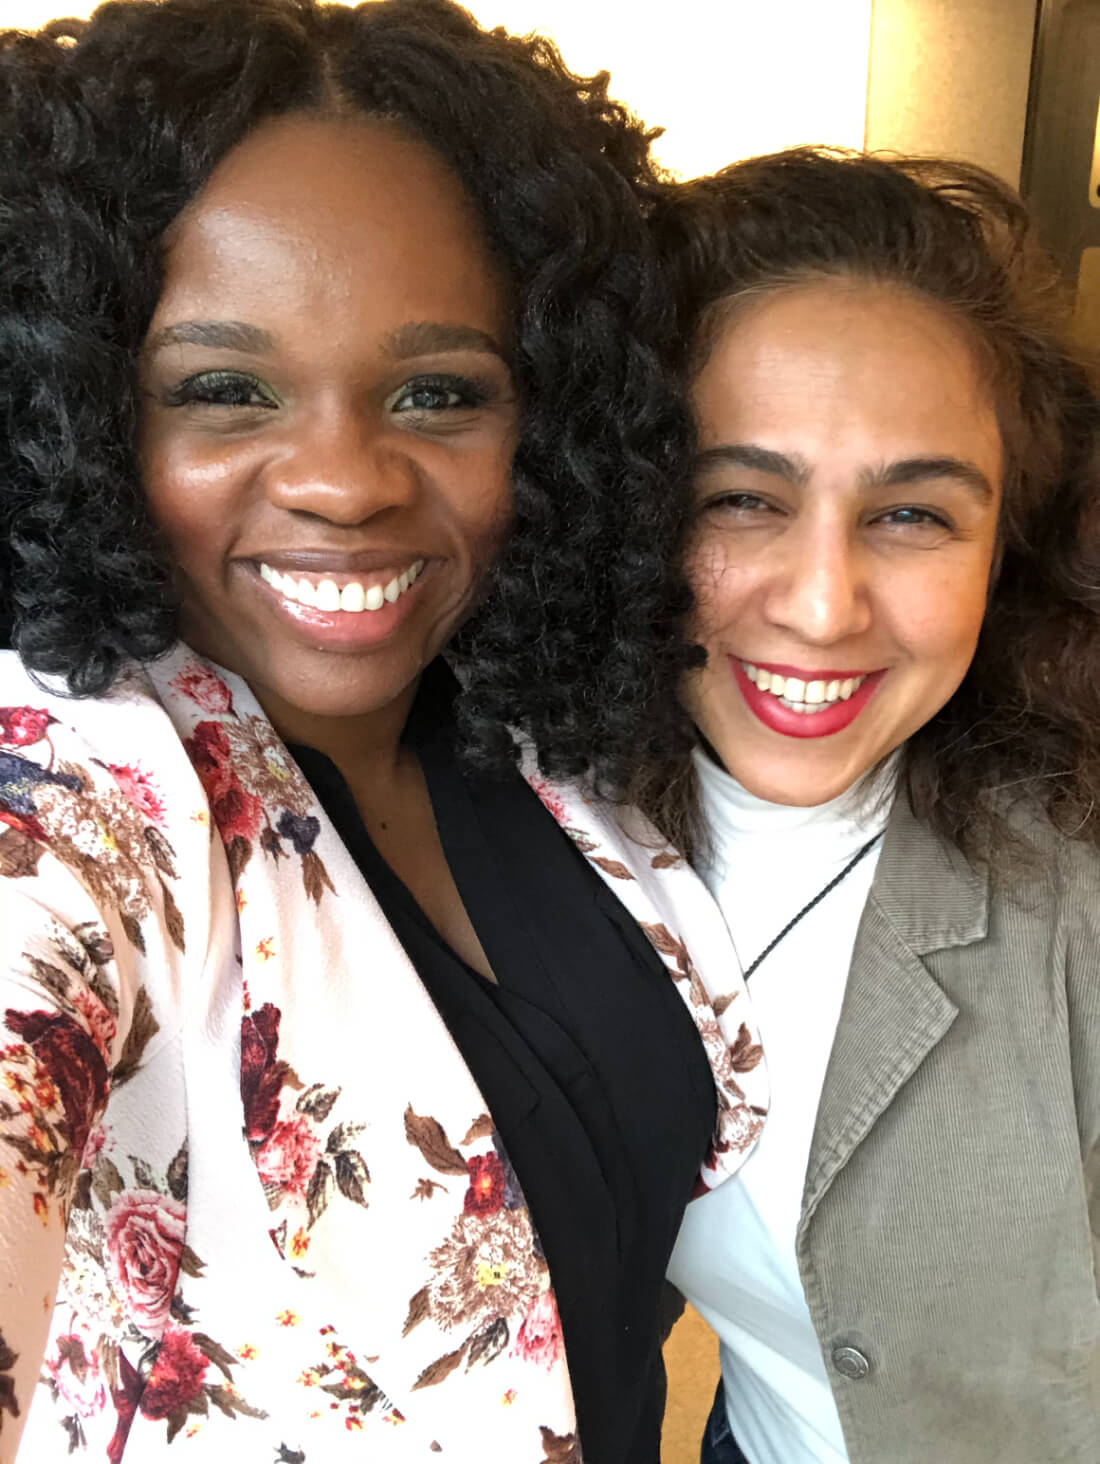 Local Purse founders Lola Akinmade Åkerström and Sara Mansouri taking a selfie